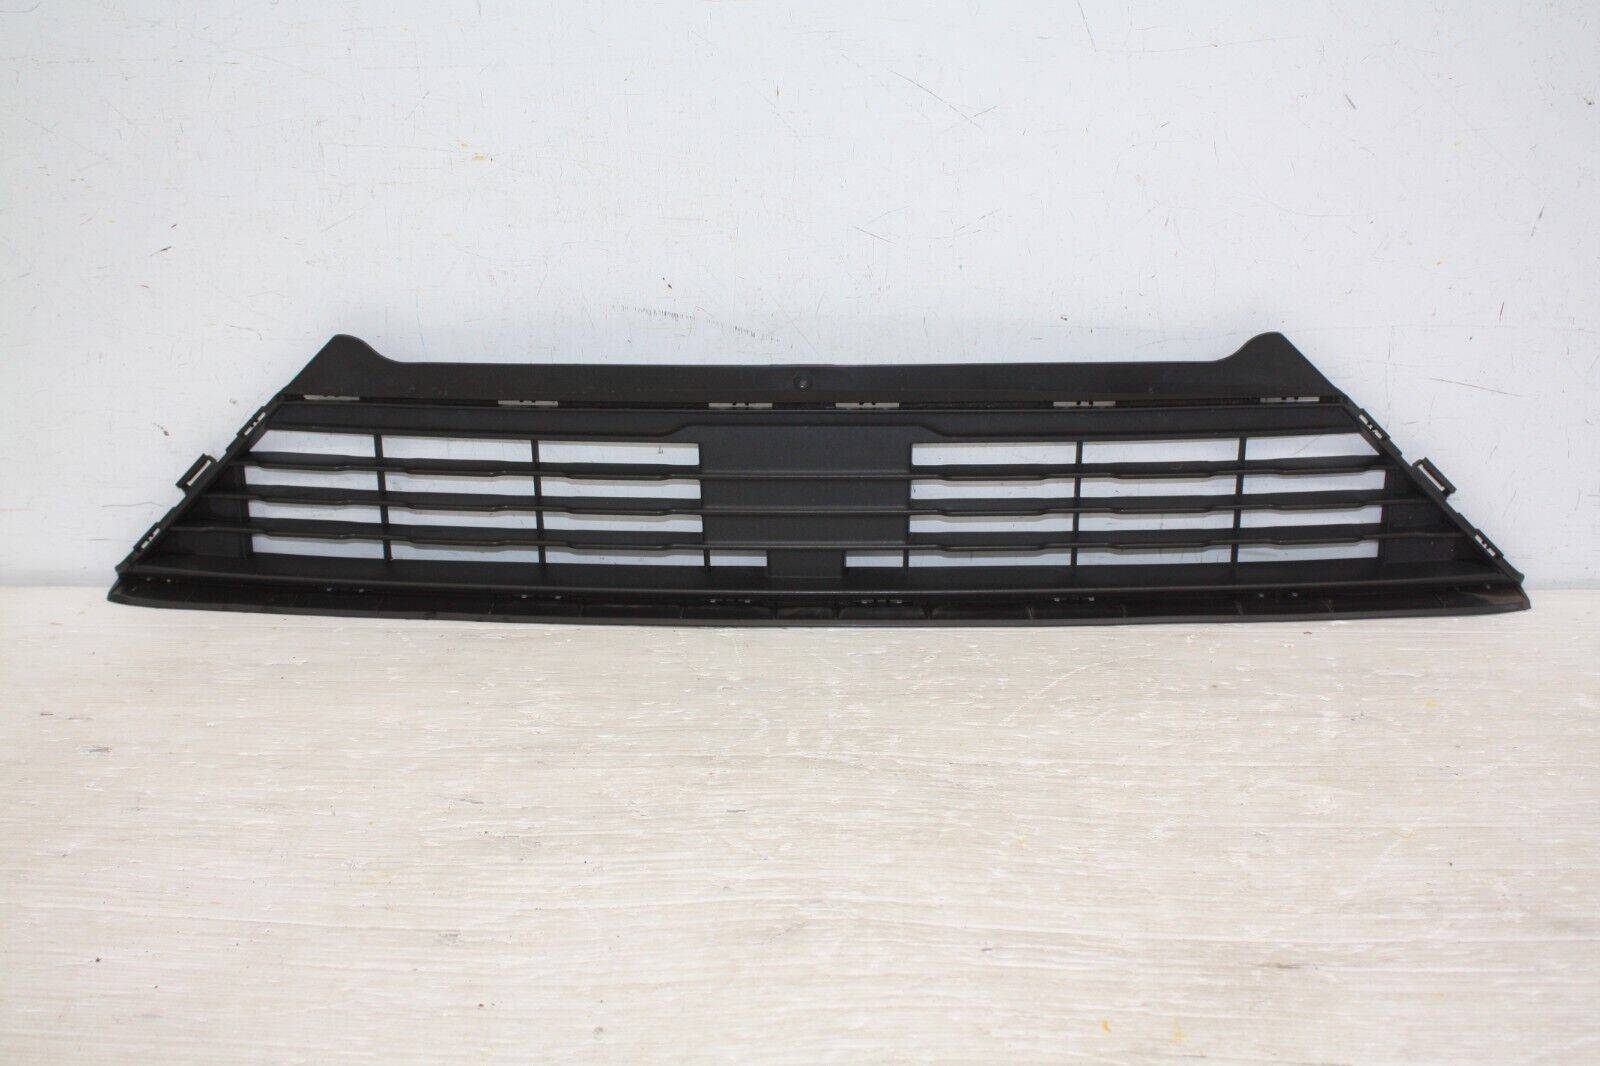 Ford Fiesta Front Bumper Lower Grill 2017 to 2021 H1BB 17K945 D1 Genuine 175926856648